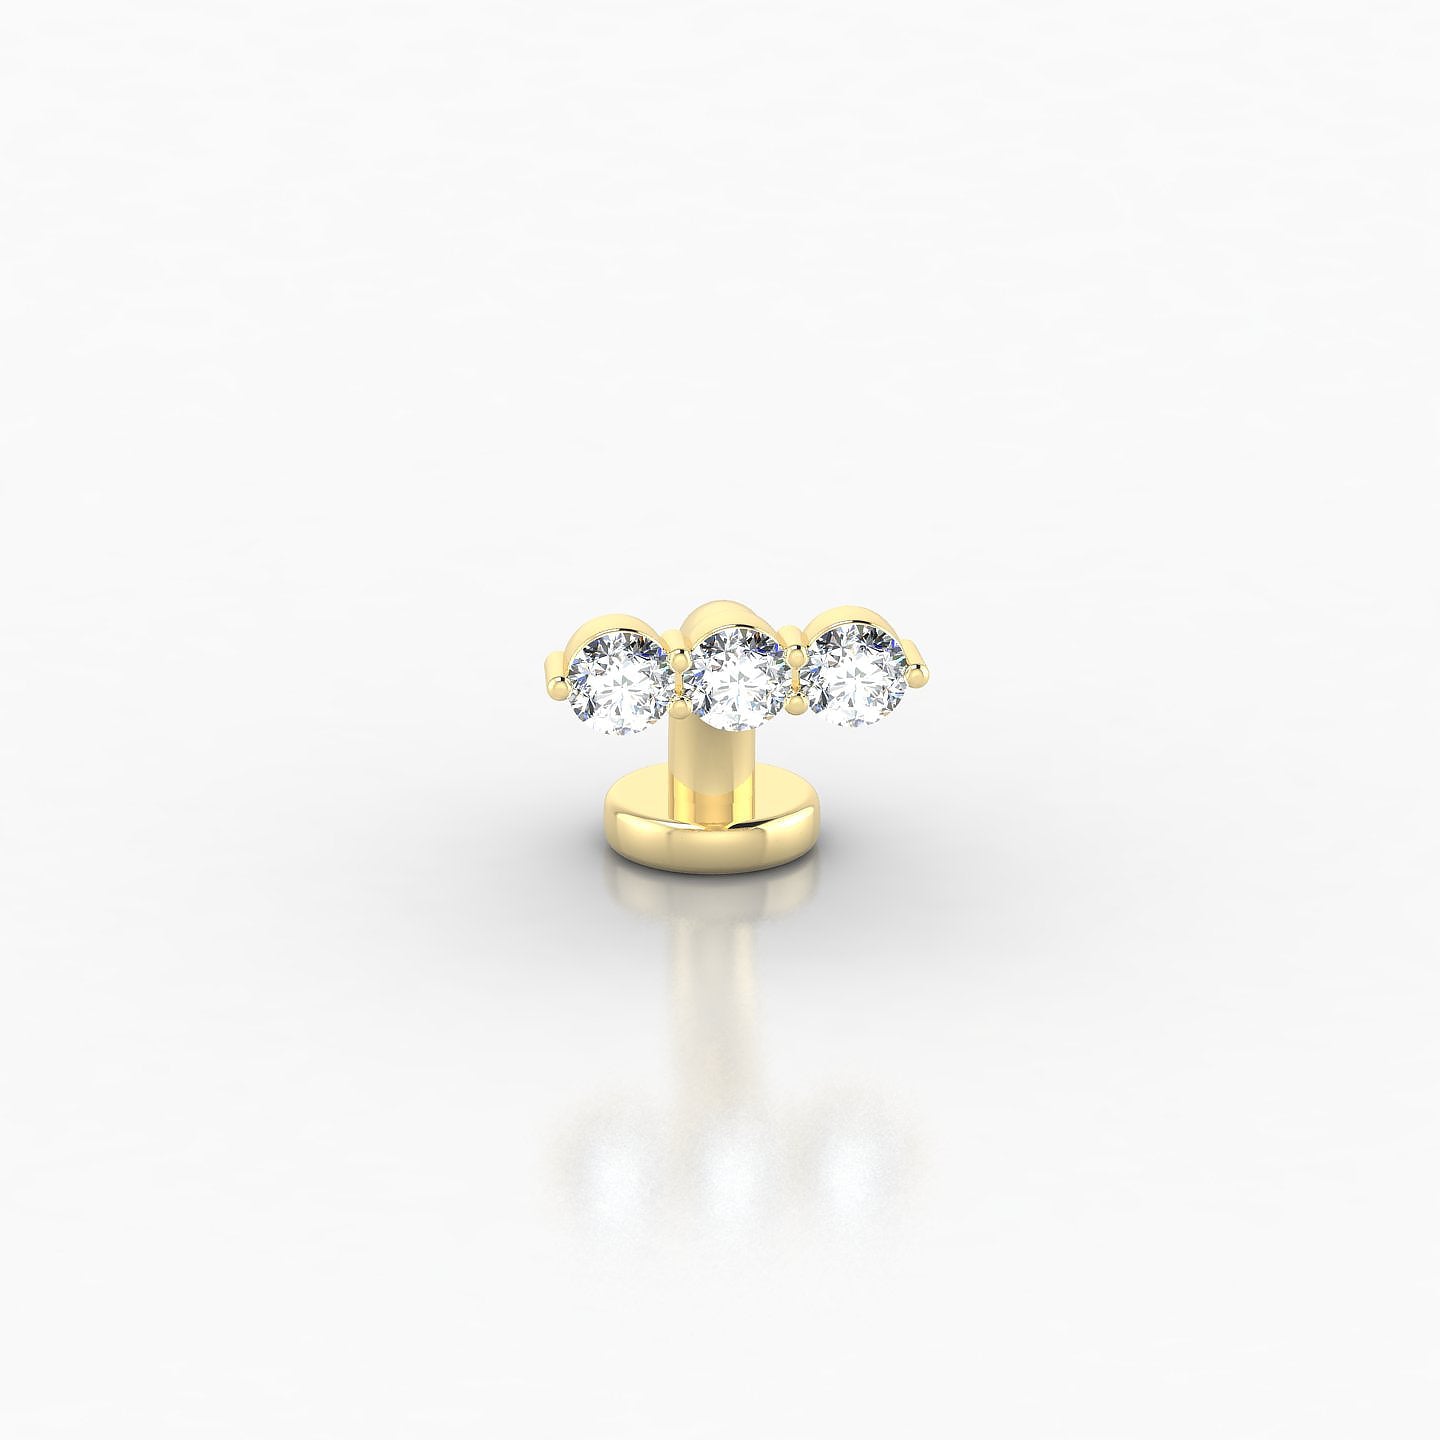 Ma'at | 18k Yellow Gold 6 mm 7.5 mm Trilogy Diamond Floating Navel Piercing